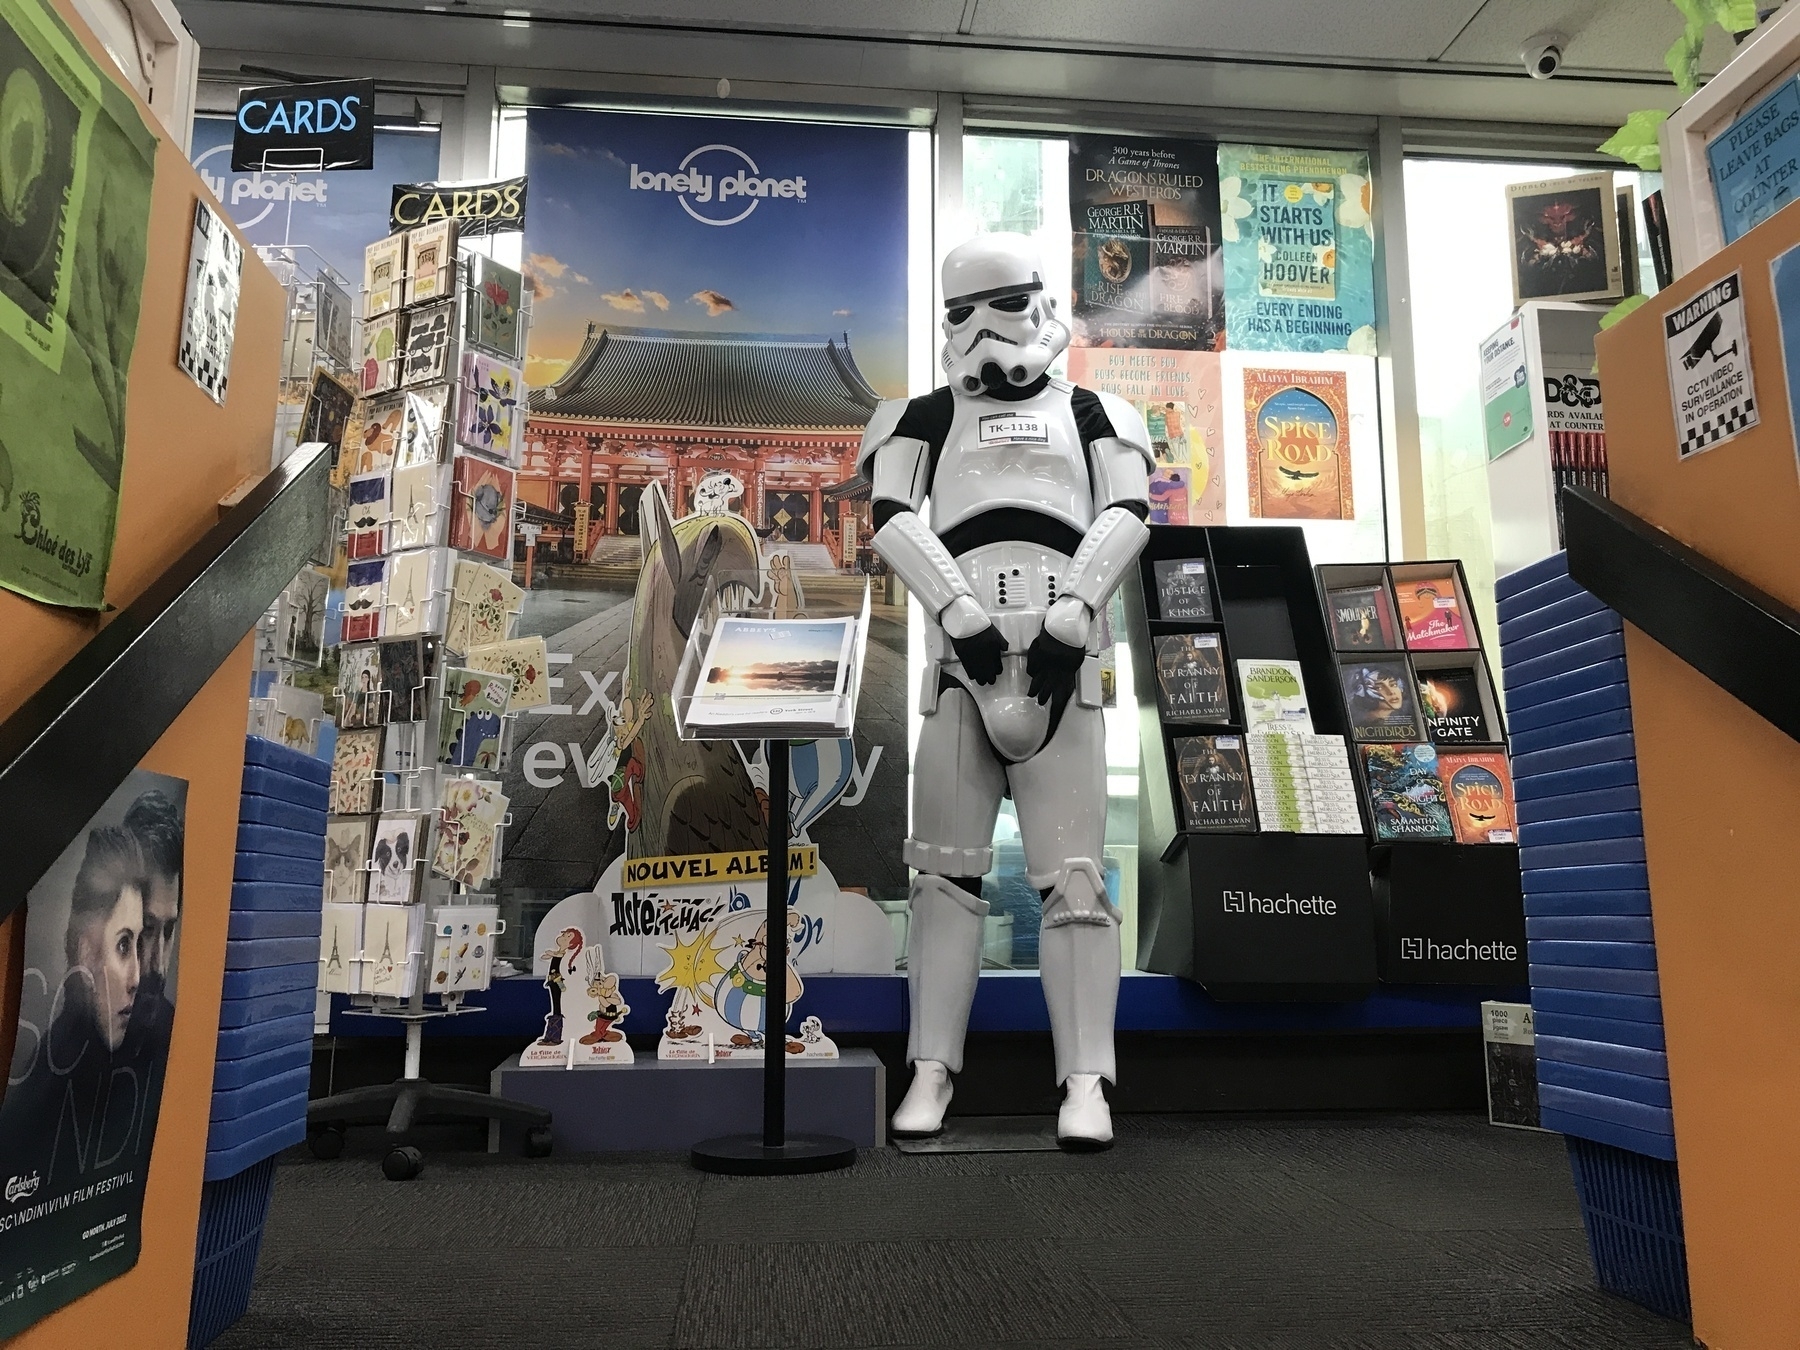 A life-size Star Wars startrooper stands at the top of a staircase, surrounded by book displays, a greeting card stand and posters. Beside the trooper is a pile of catalogues in an angled tray. The posters feature ‘Lonely Planet’ guides and current fiction titles like ‘It Starts with Us’ and ‘Spice Road’, and an Asterix title lebelled ‘Nouvel Album’ in French, with cutouts of characters below.